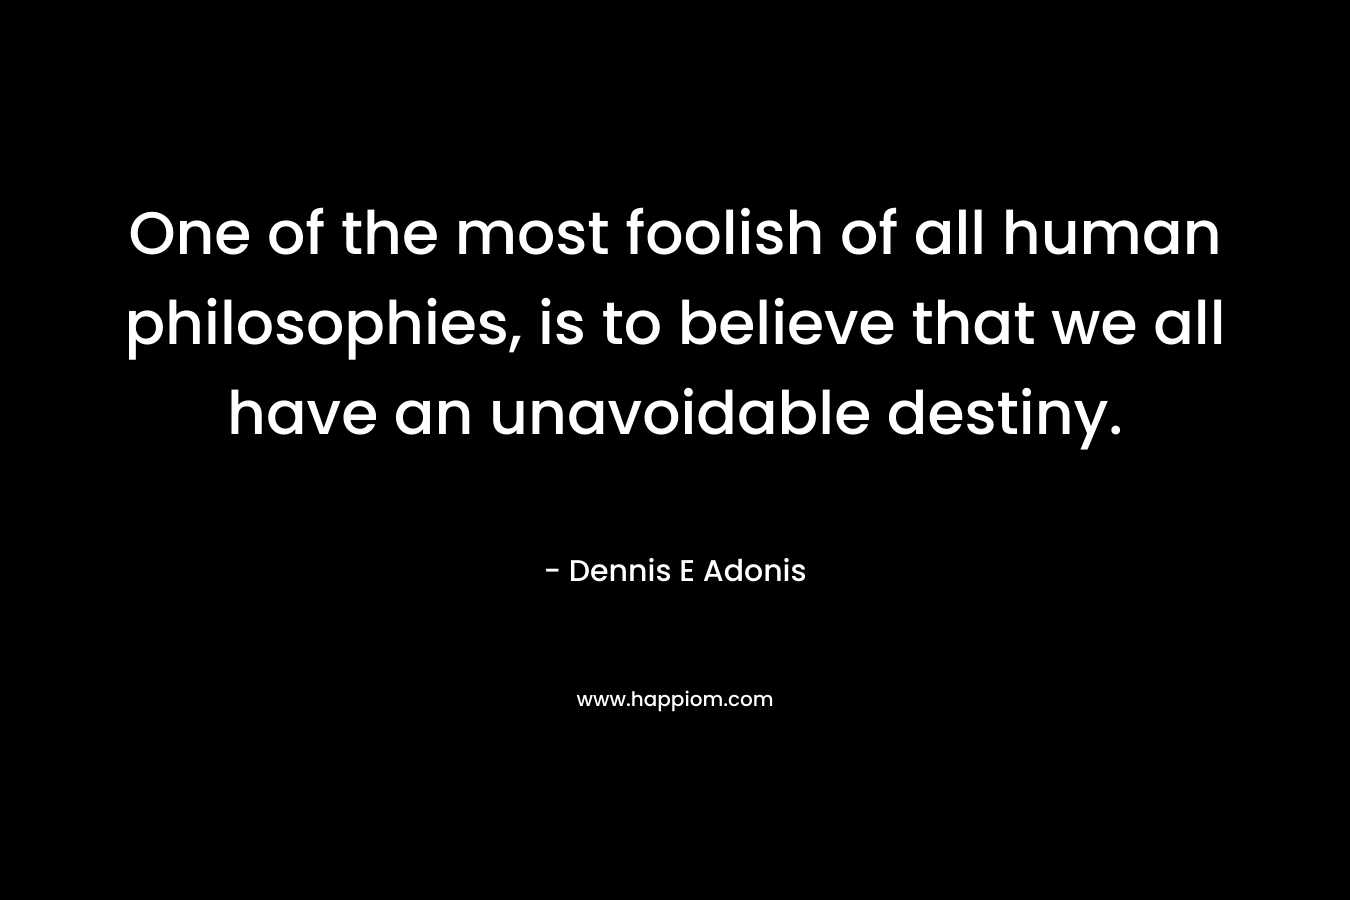 One of the most foolish of all human philosophies, is to believe that we all have an unavoidable destiny. – Dennis E Adonis